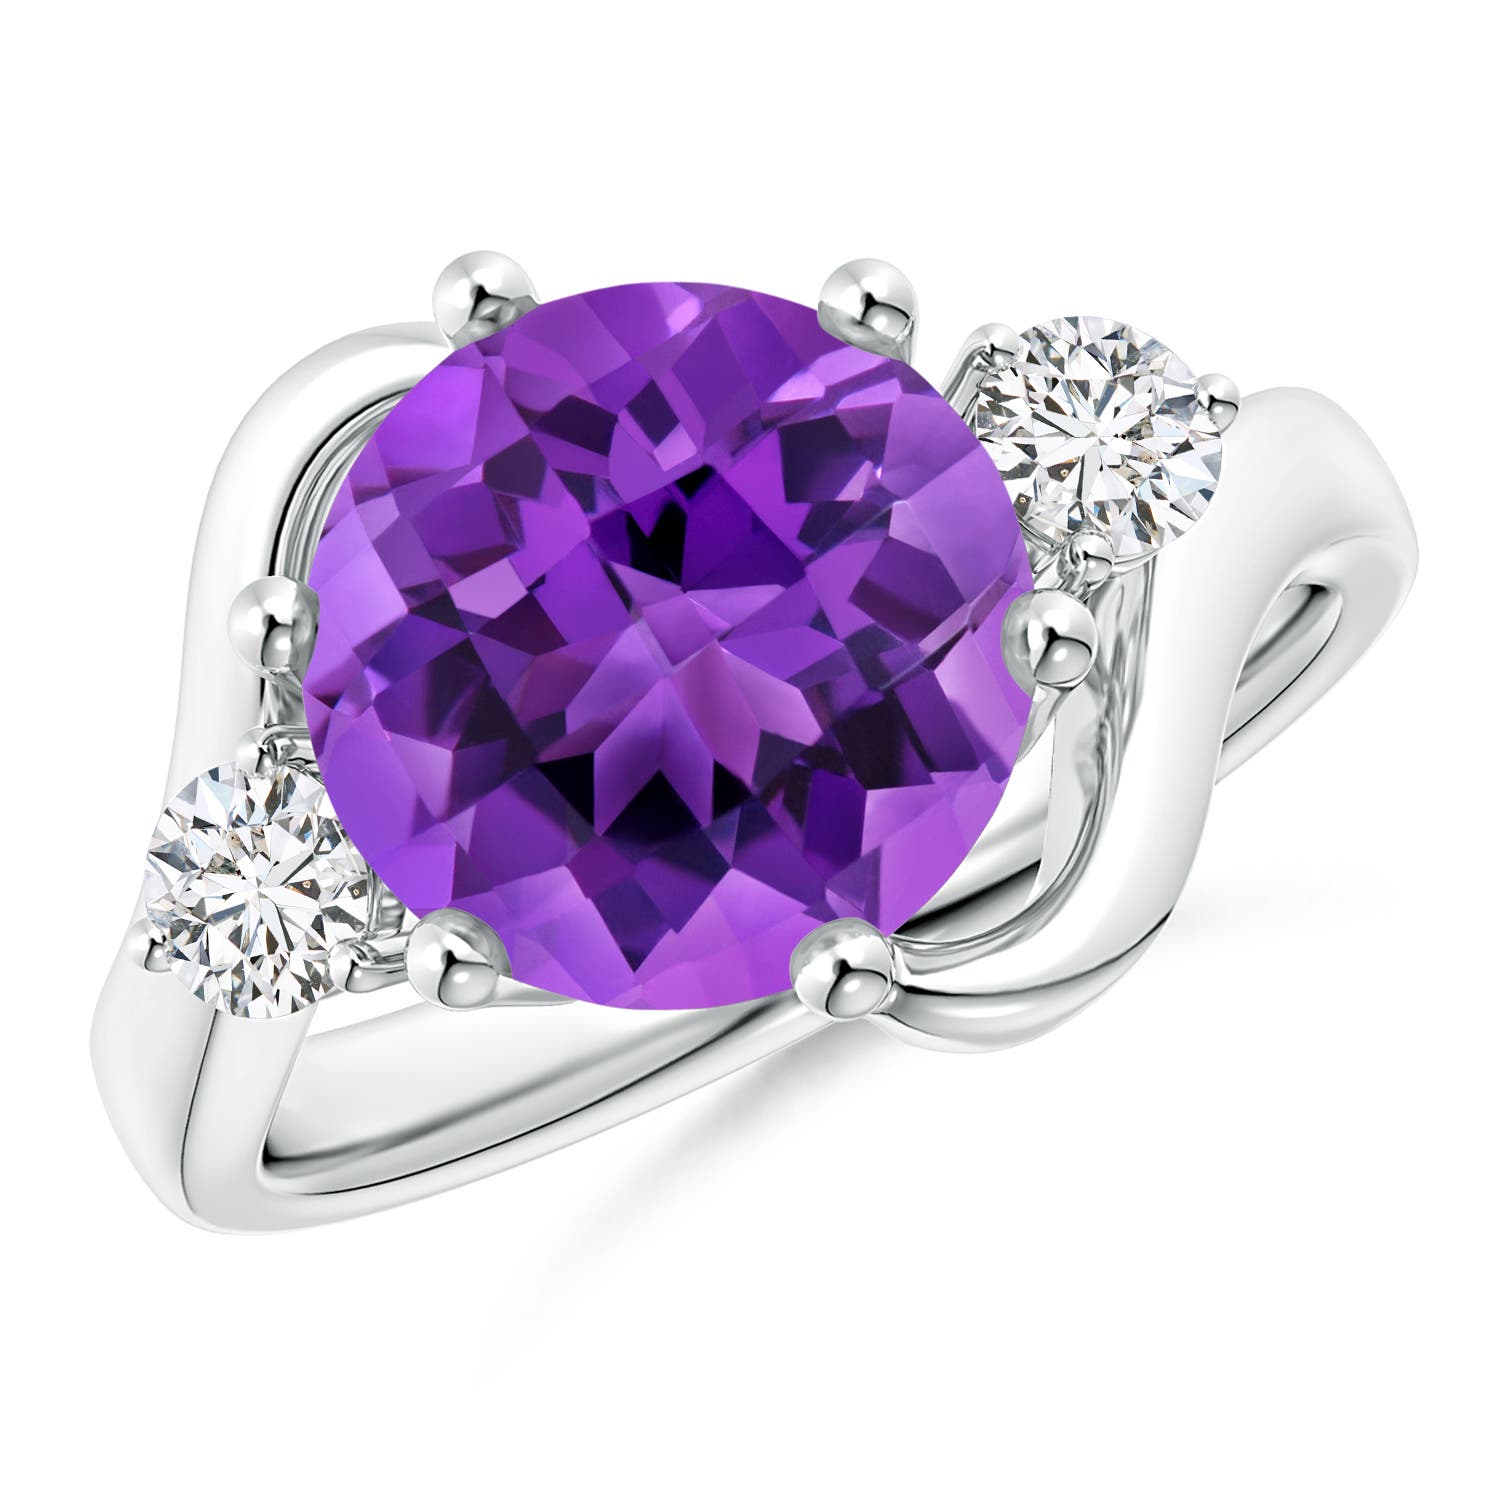 AAA - Amethyst / 4.04 CT / 14 KT White Gold